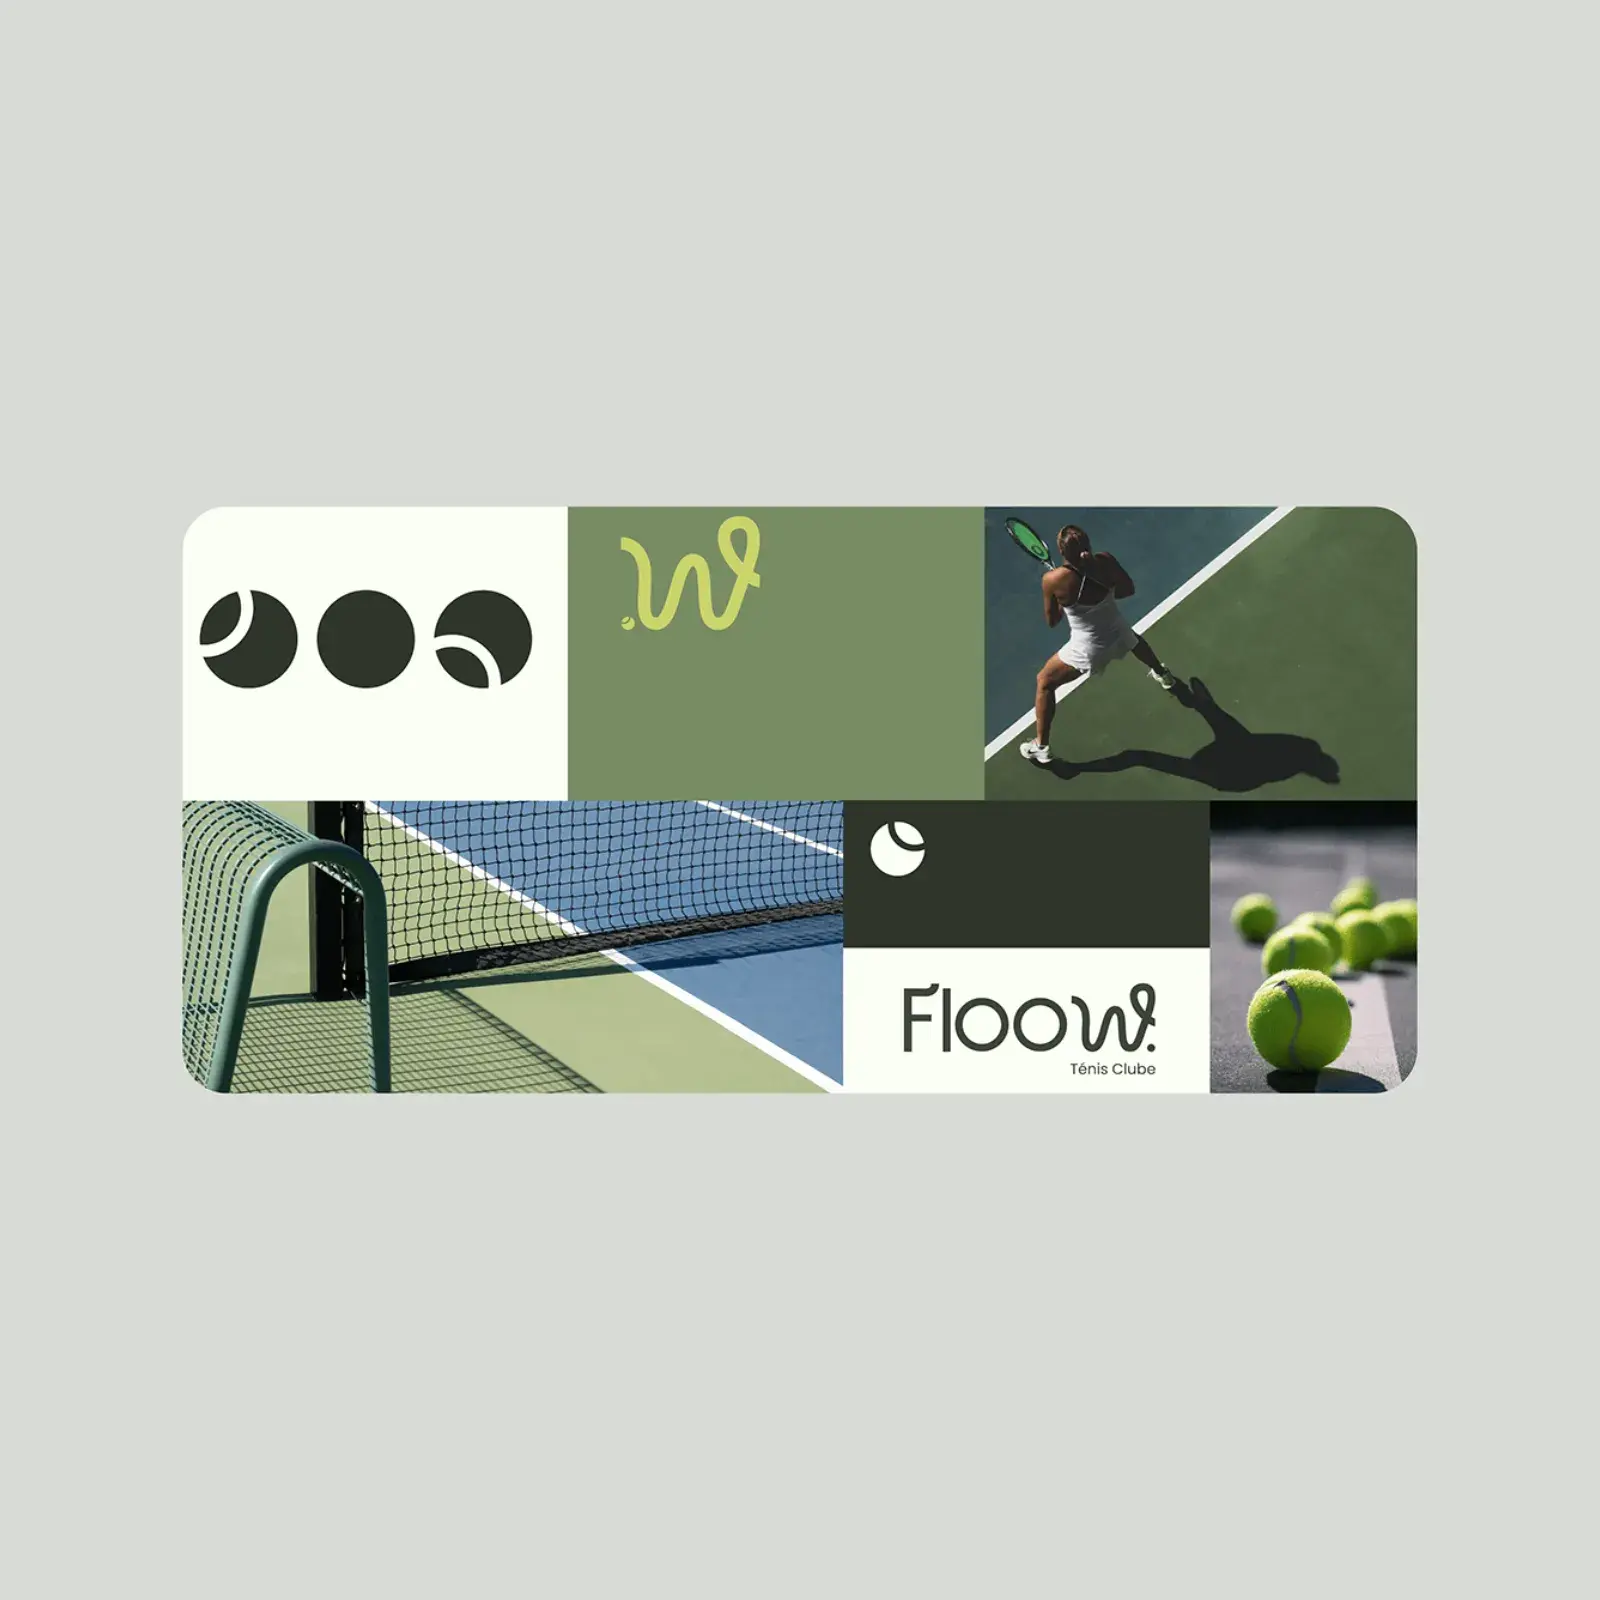 Floow Tennis Club’s Branding and Visual Identity Redesign